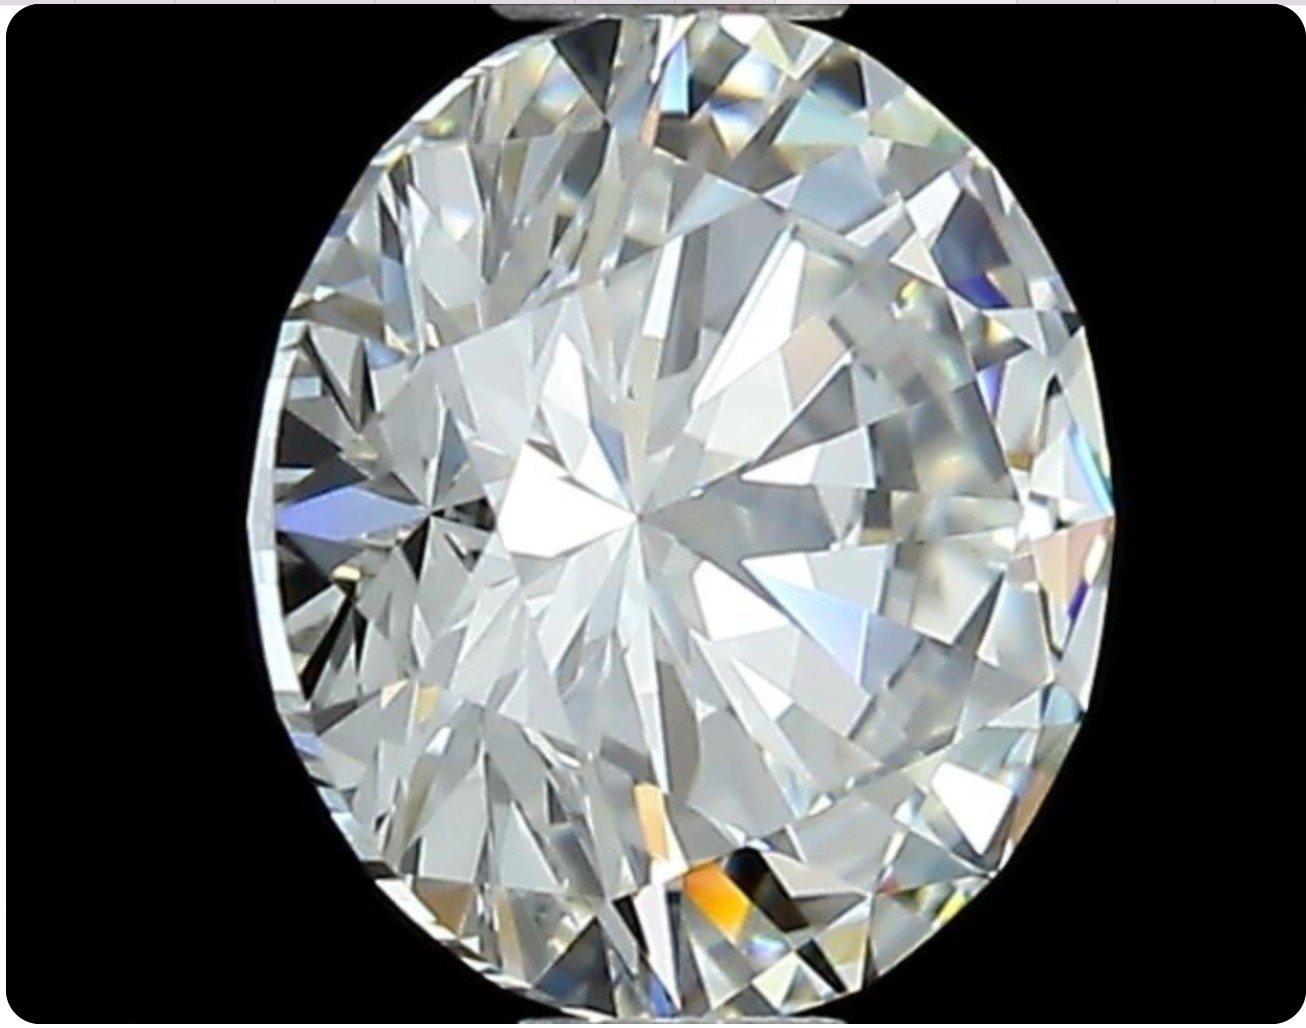 Sparkling natural cut round brilliant diamond in a 1 carat G VVS2 very good cut. This diamond comes with GIA Certificate and laser inscription number.

SKU: C-DSPV-167352-9
GIA 7456165498
